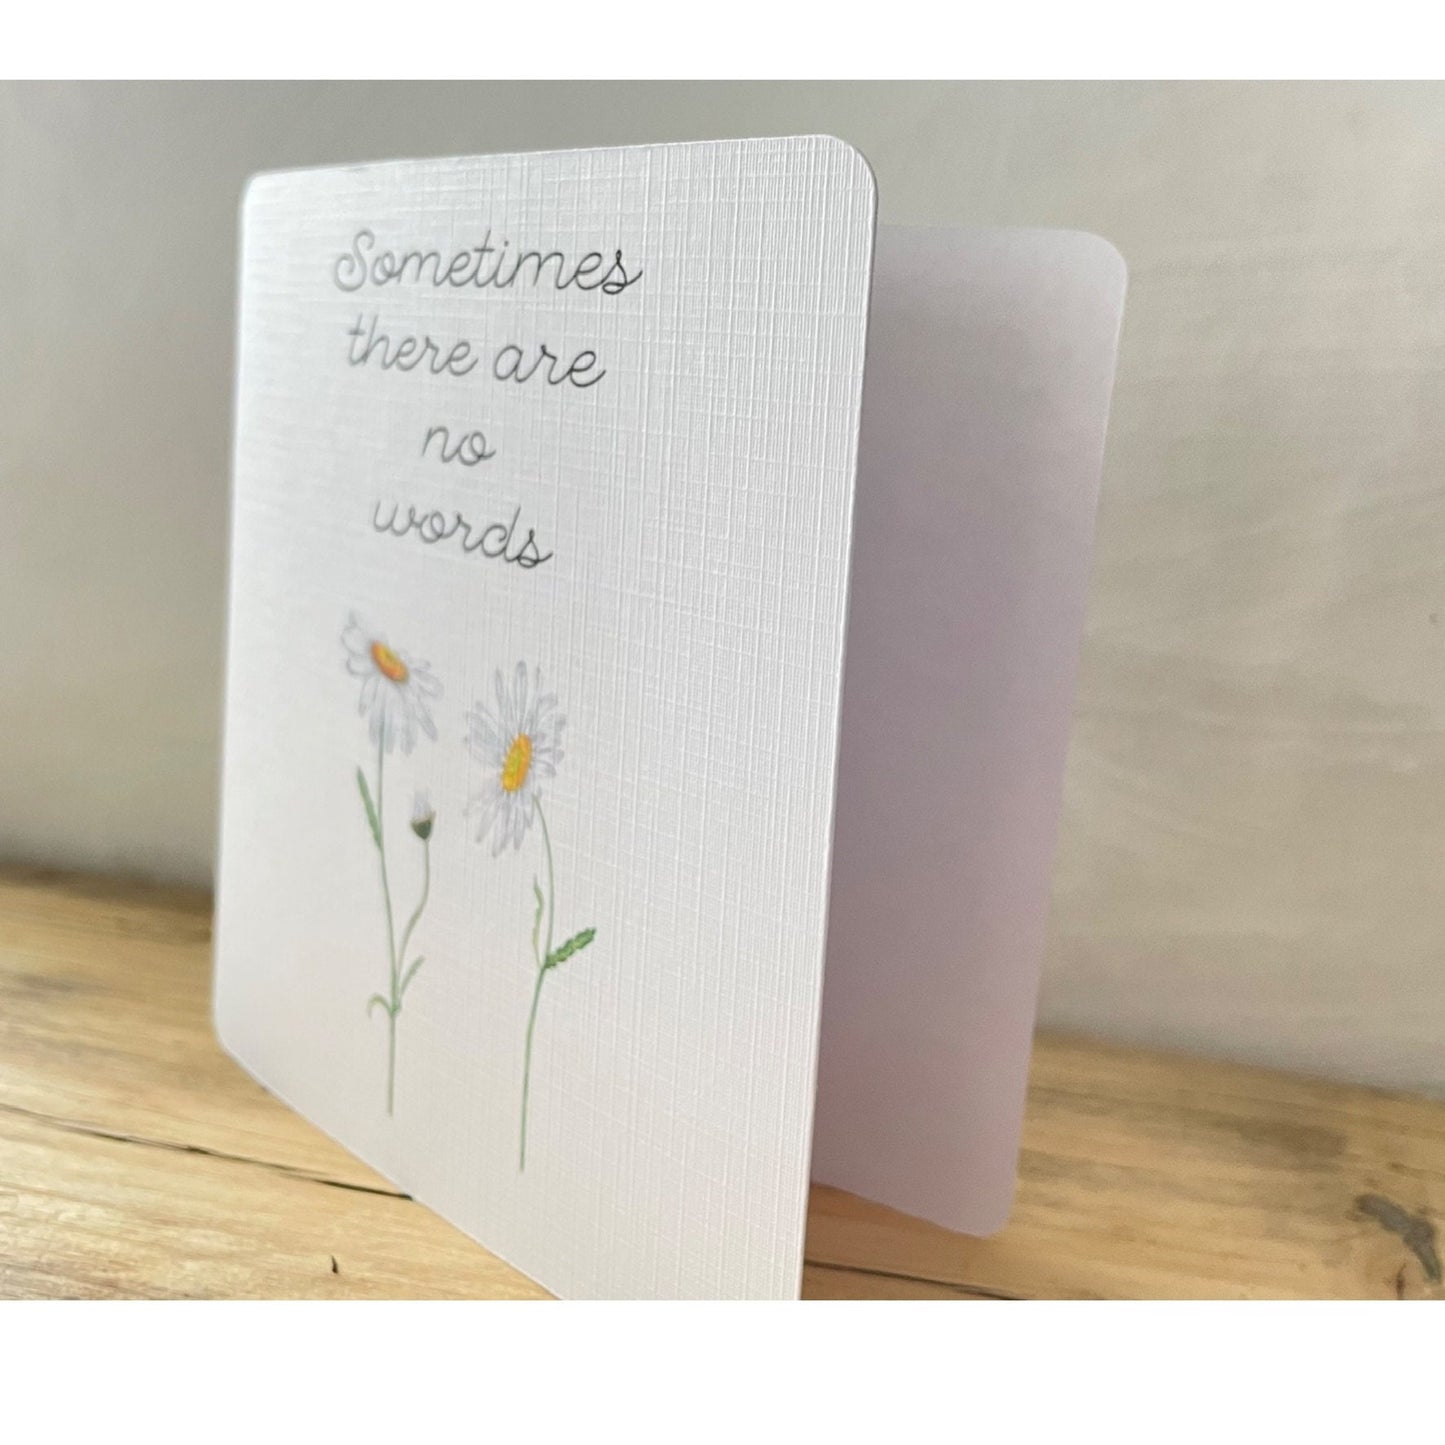 Sometimes There are no Words Sympathy Card with Watercolour Daisies, Sorry for Your Loss Condolence Card, Floral Card with Handmade Envelope